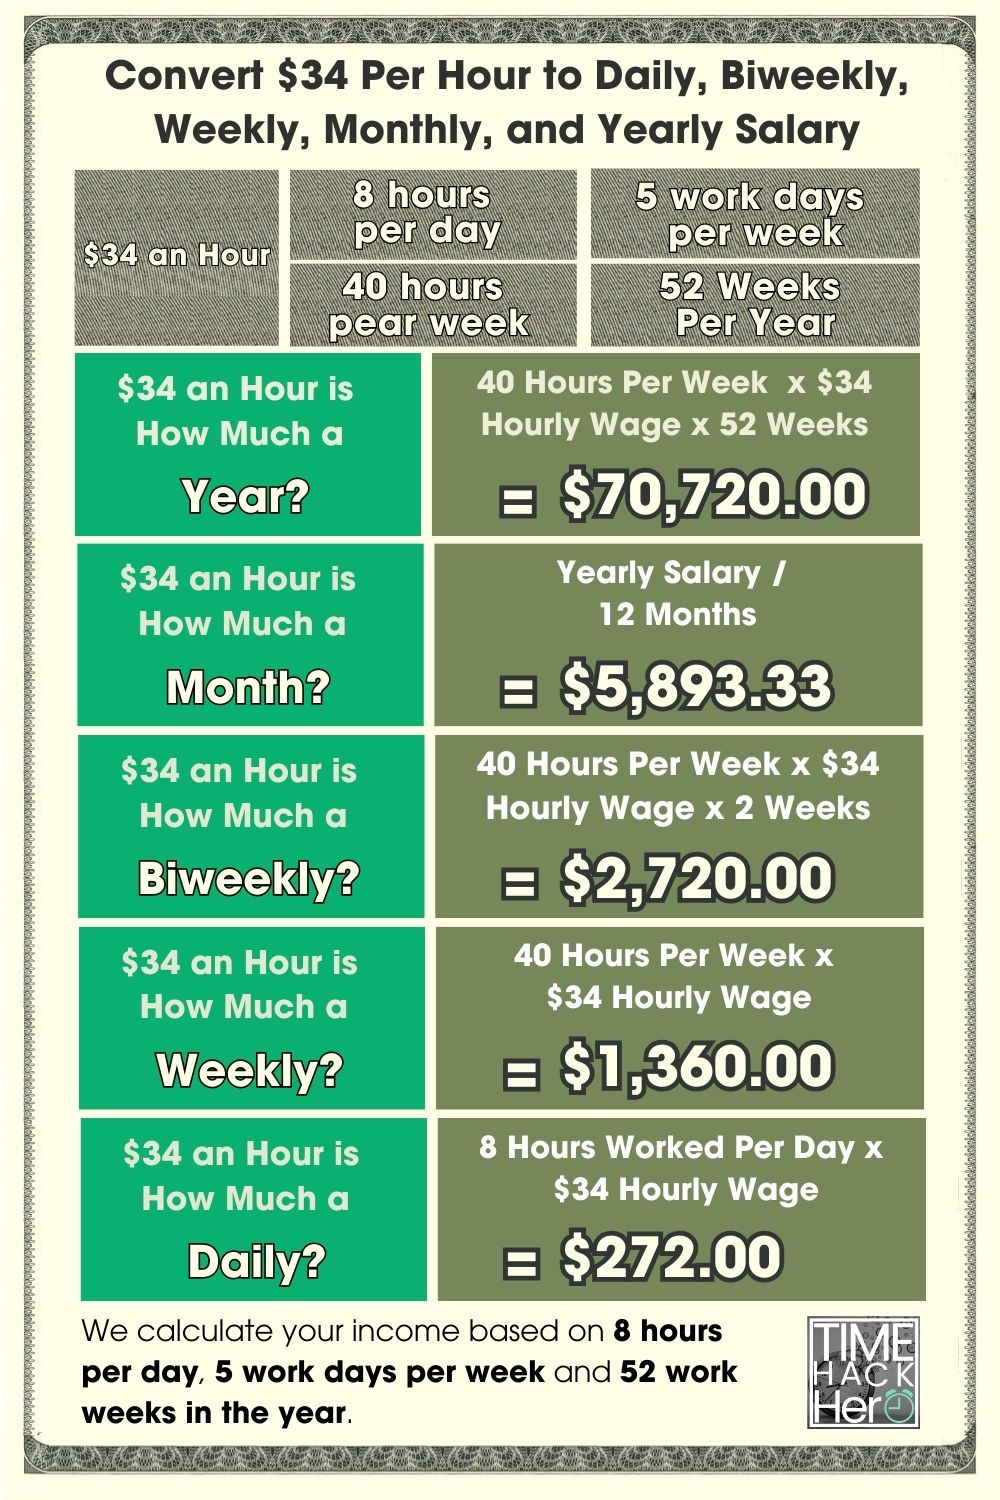 Convert $34 Per Hour to Daily, Biweekly, Weekly, Monthly, and Yearly Salary